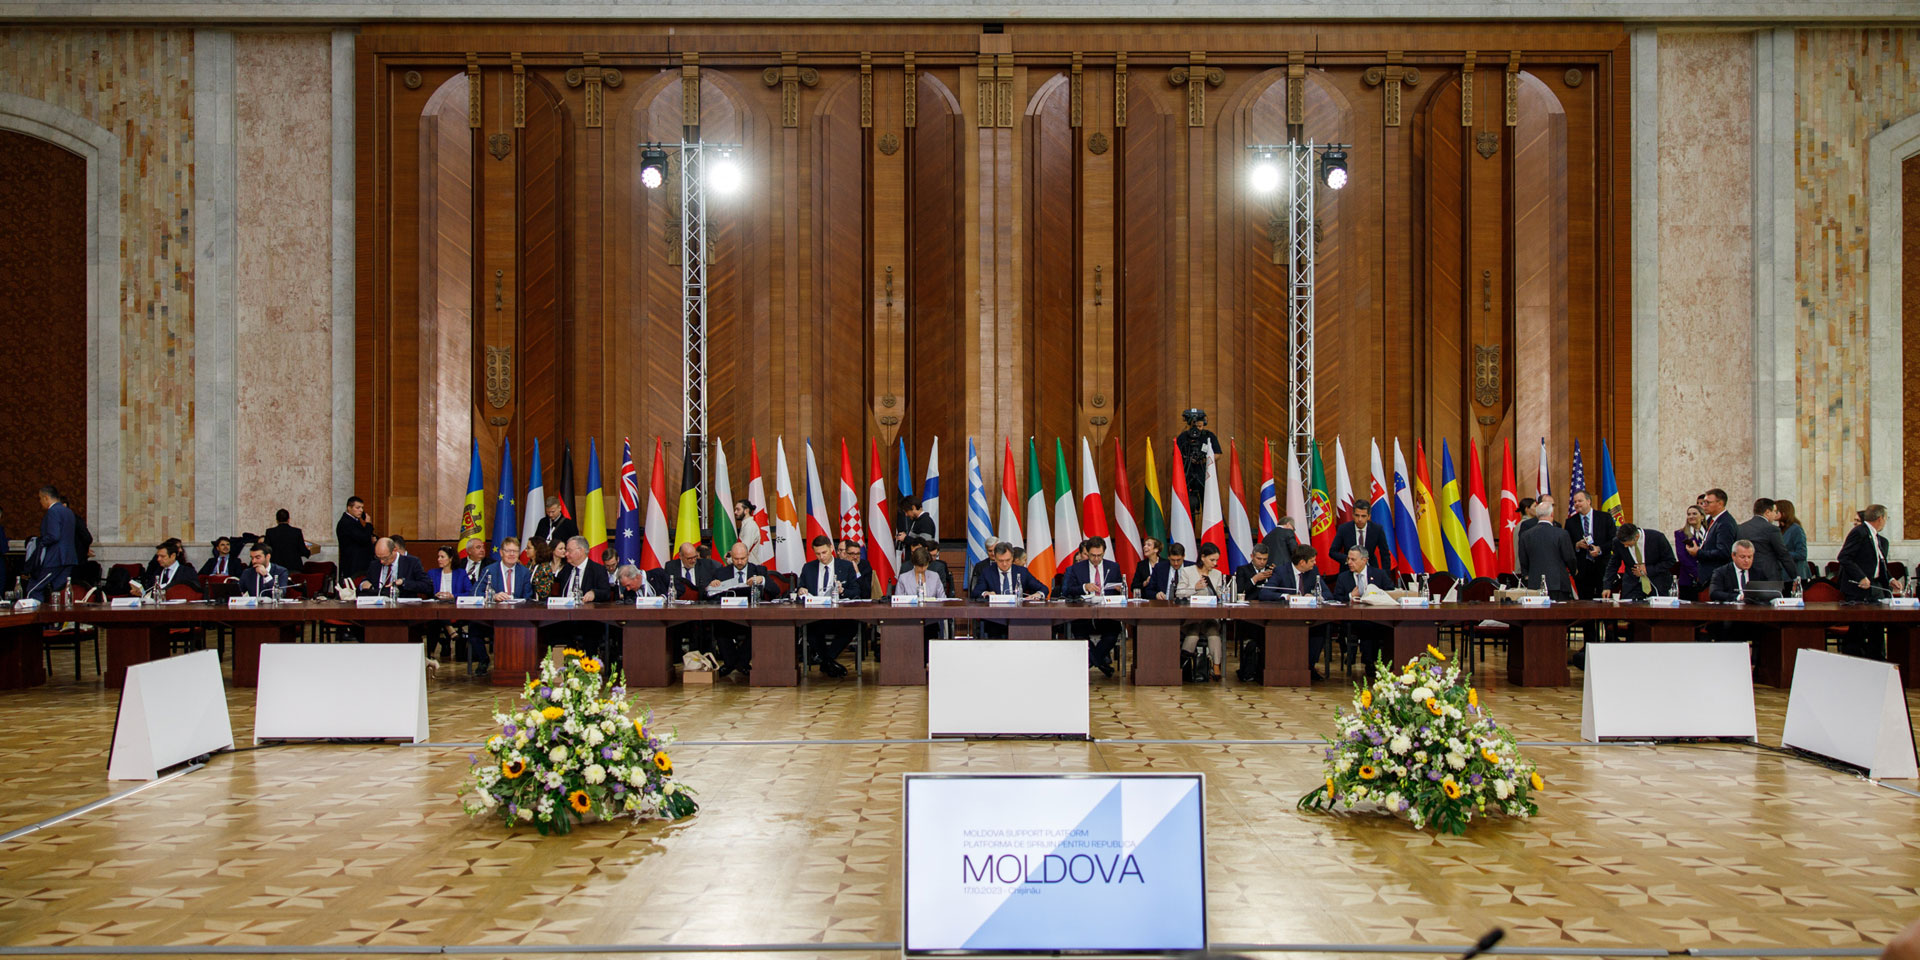 Photo of the room where the fourth edition of the "Moldova Support Platform" was held in Chisinau.